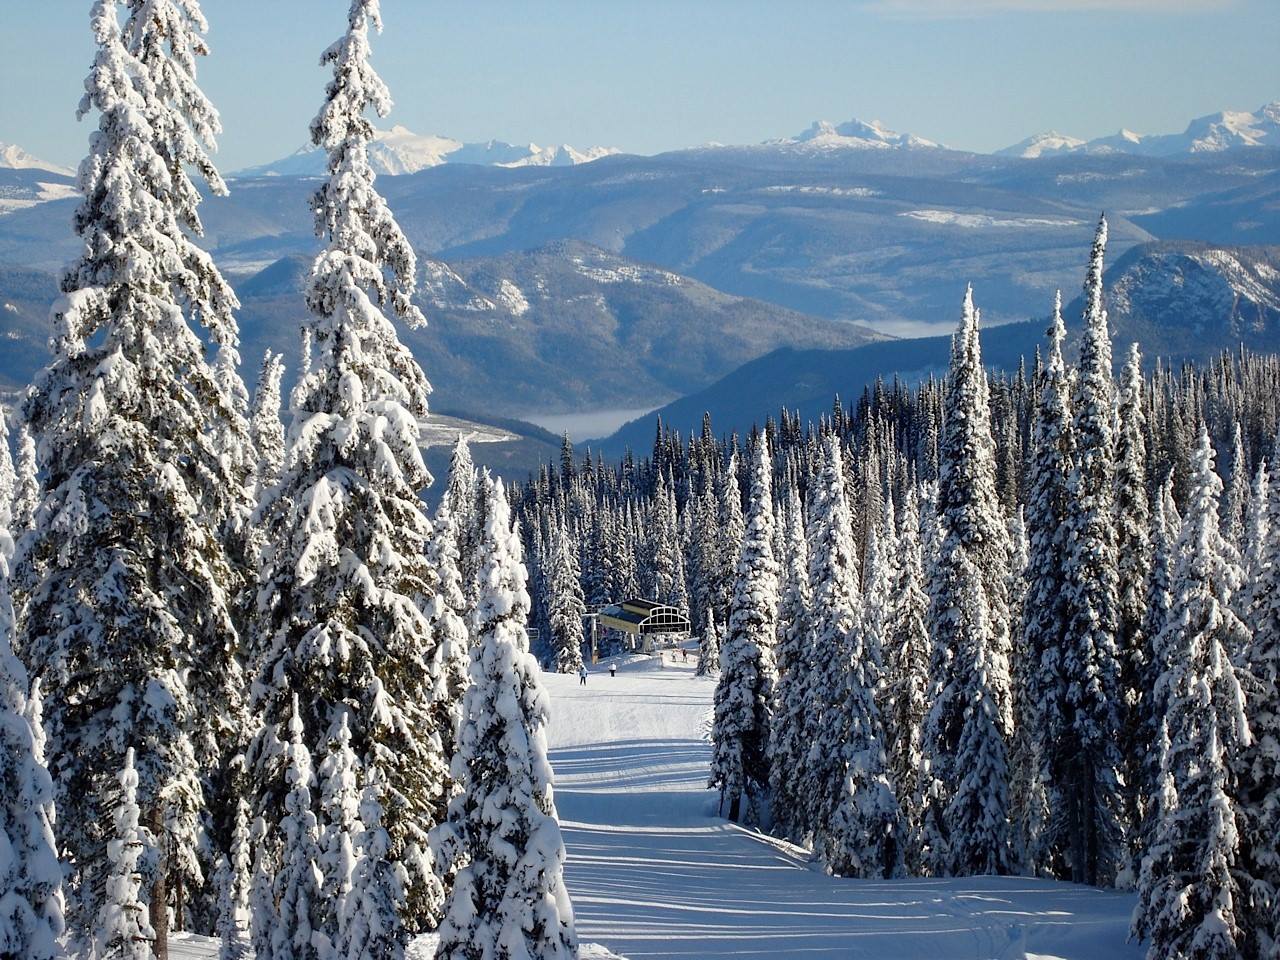 Where To Ski or Board This Week Ending January 2nd, 2016